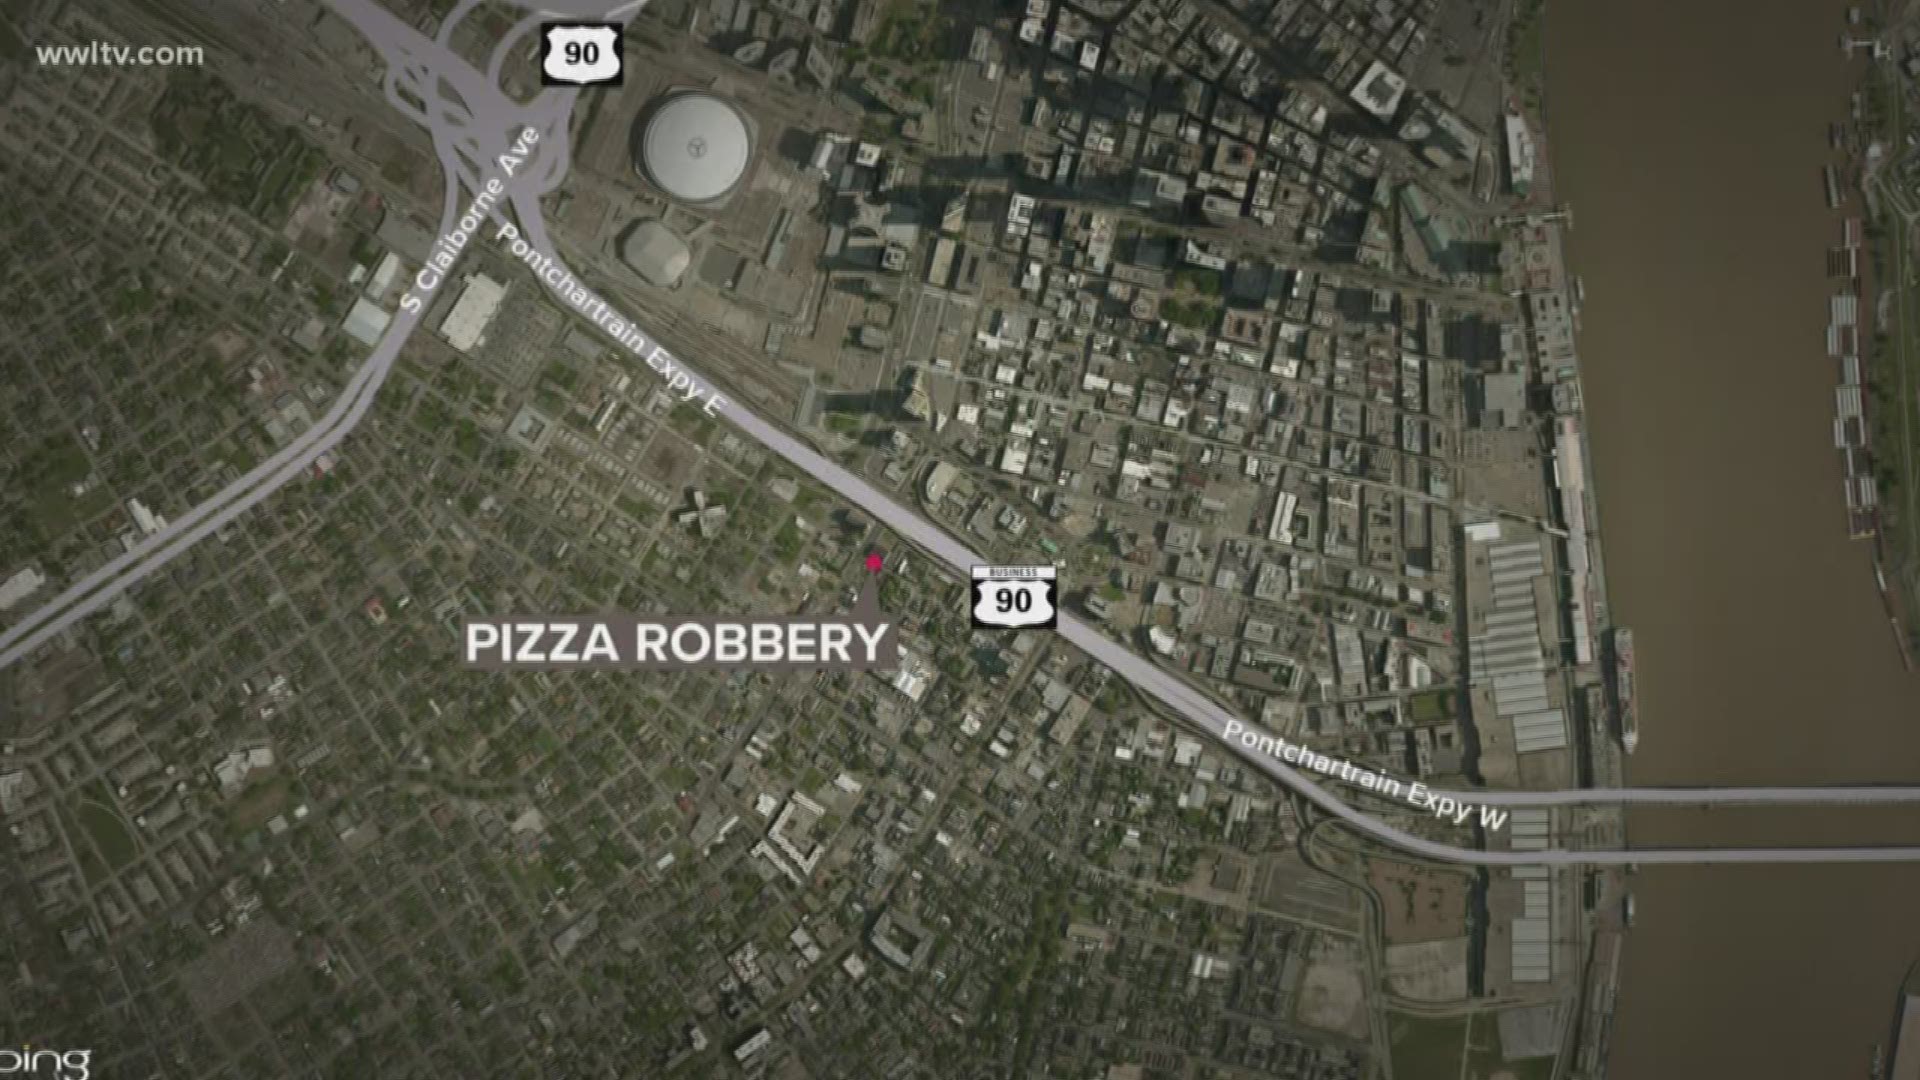 A pizza delivery driver had his delivery stolen by two men who pulled out a gun early Sunday morning, according to information released by the NOPD.